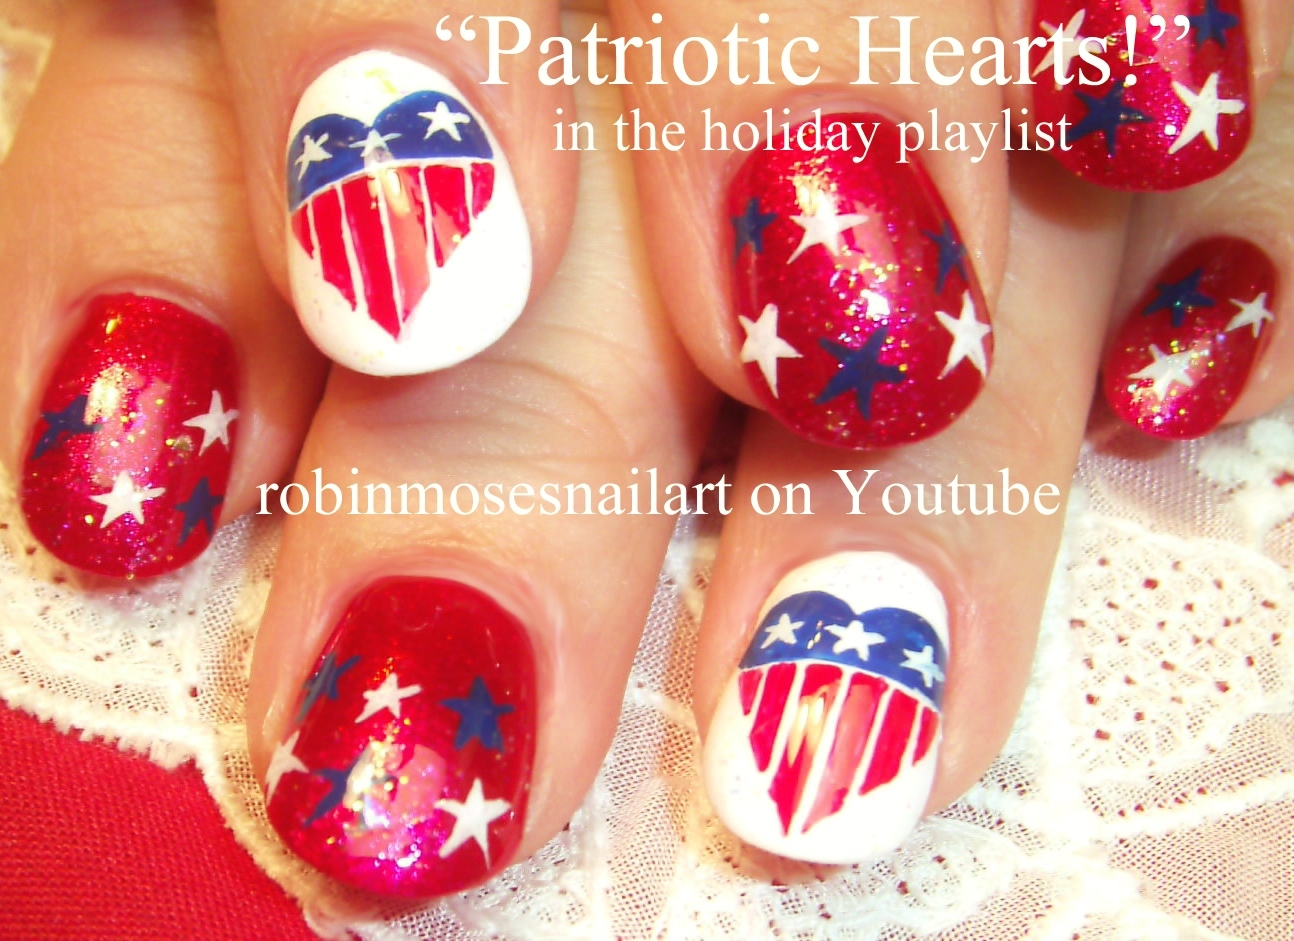 2. "Red, White, and Blue Toe Nail Designs for Independence Day" - wide 7